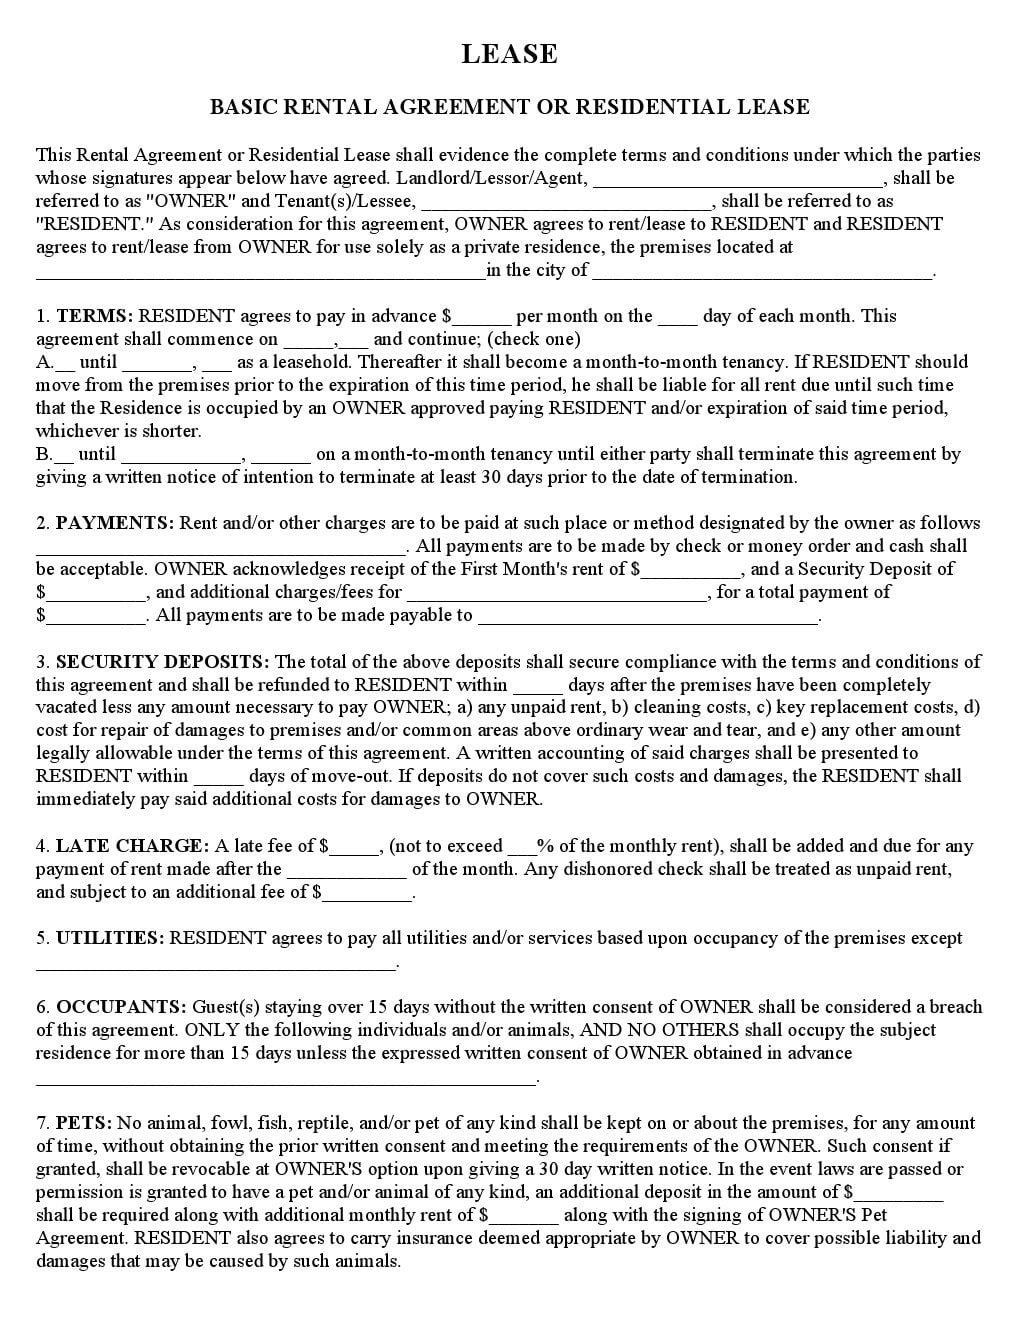 download-free-basic-rental-agreement-or-residential-lease-printable